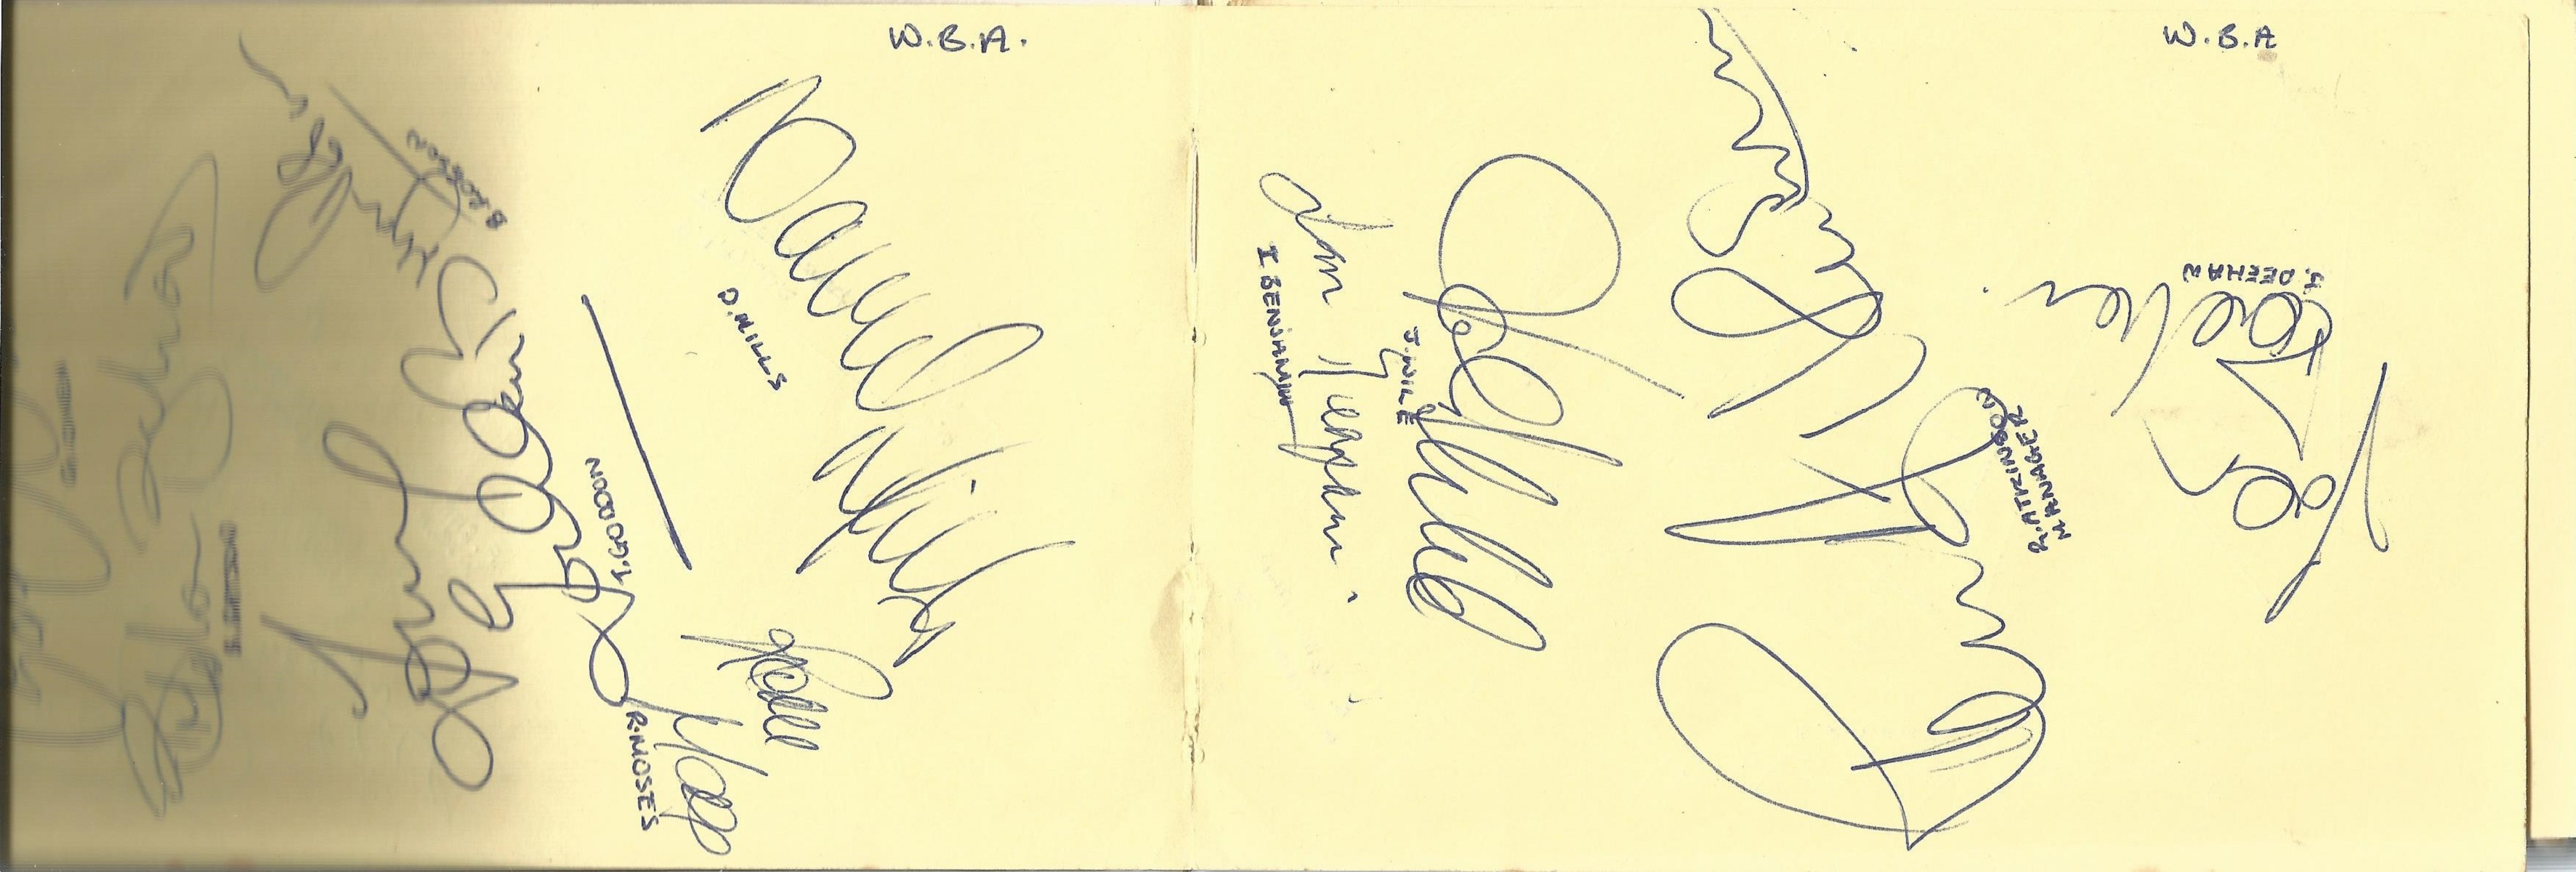 Football and Cricket Legends Autograph book over 150 signatures from some legendary names of the - Image 2 of 8